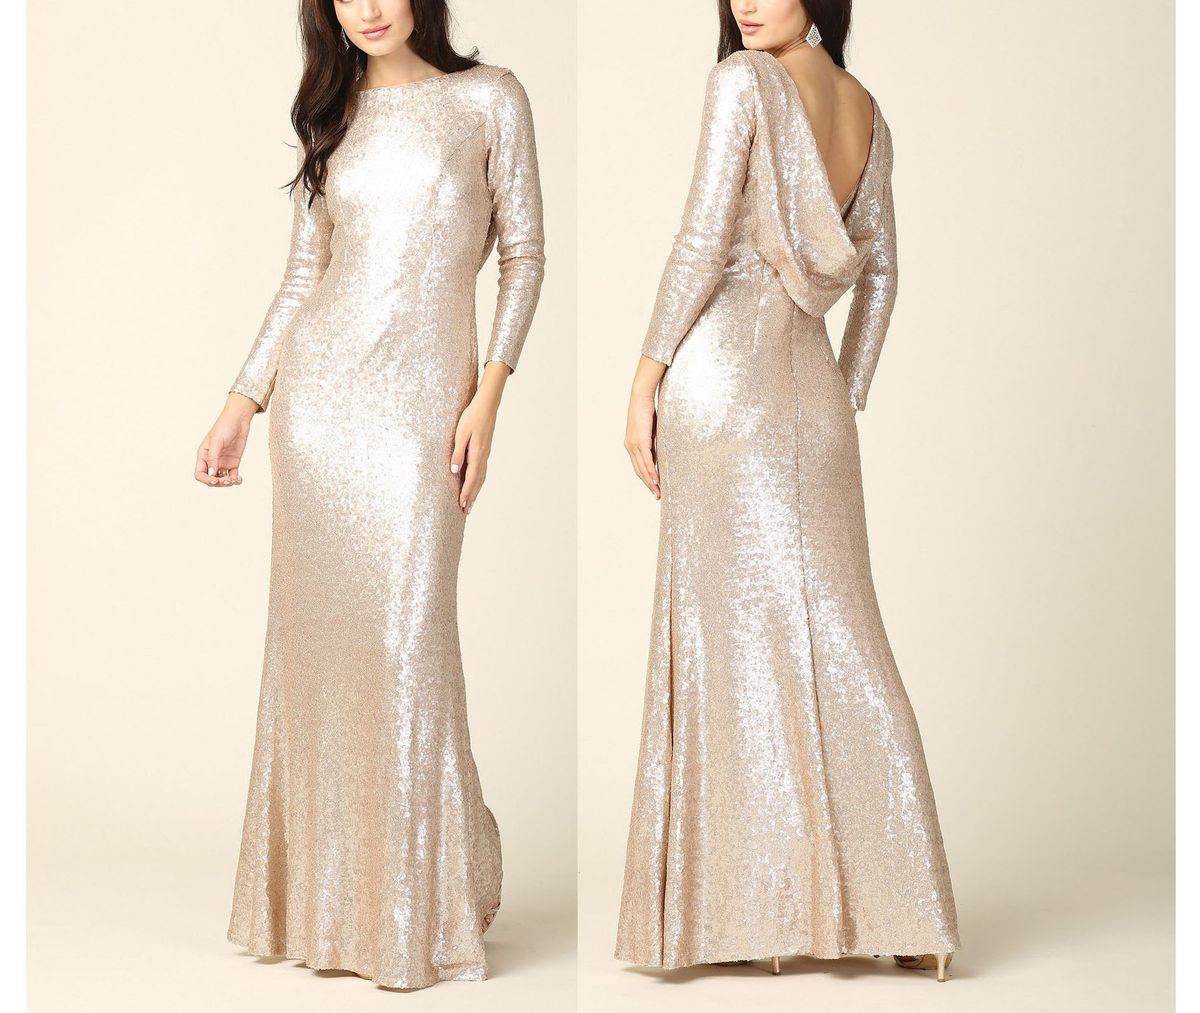 Style Champagne Sequin Long Sleeve Cowl Back Ball Gown EVA Size 12 Nude Floor Length Maxi on Queenly